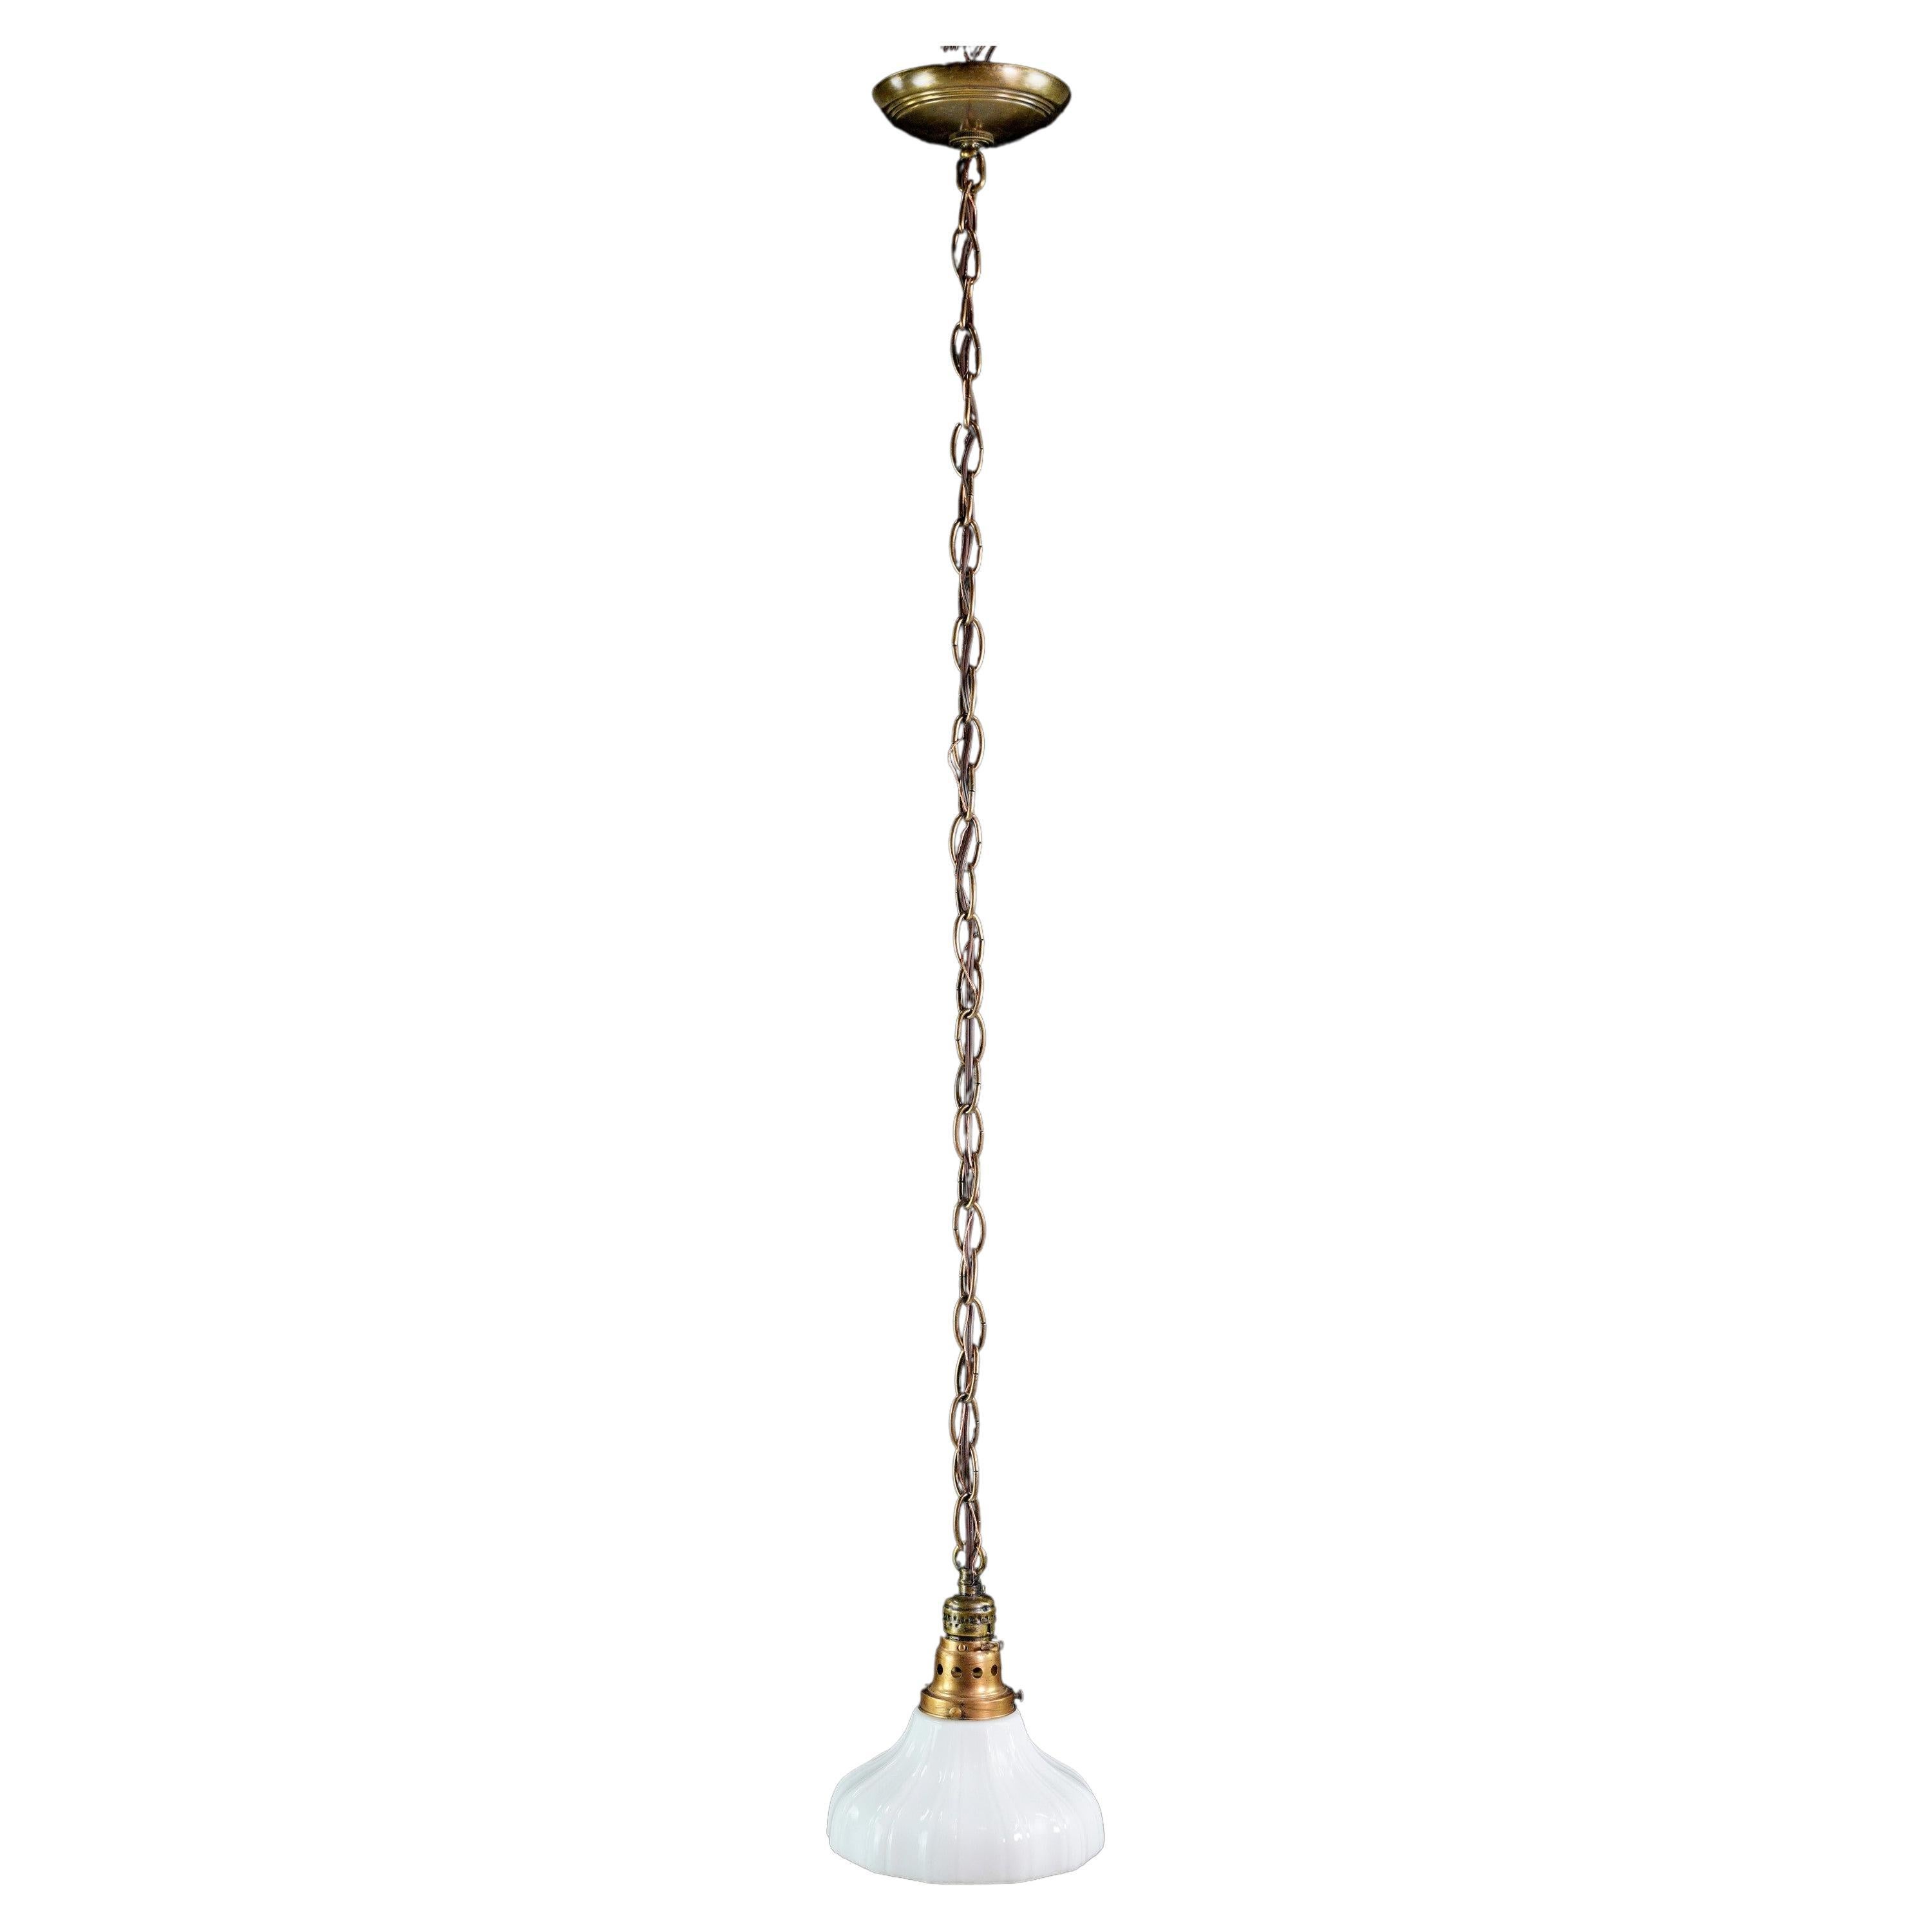 Antique Milk Glass Brass Chain Pendant Light Qty Available For Sale